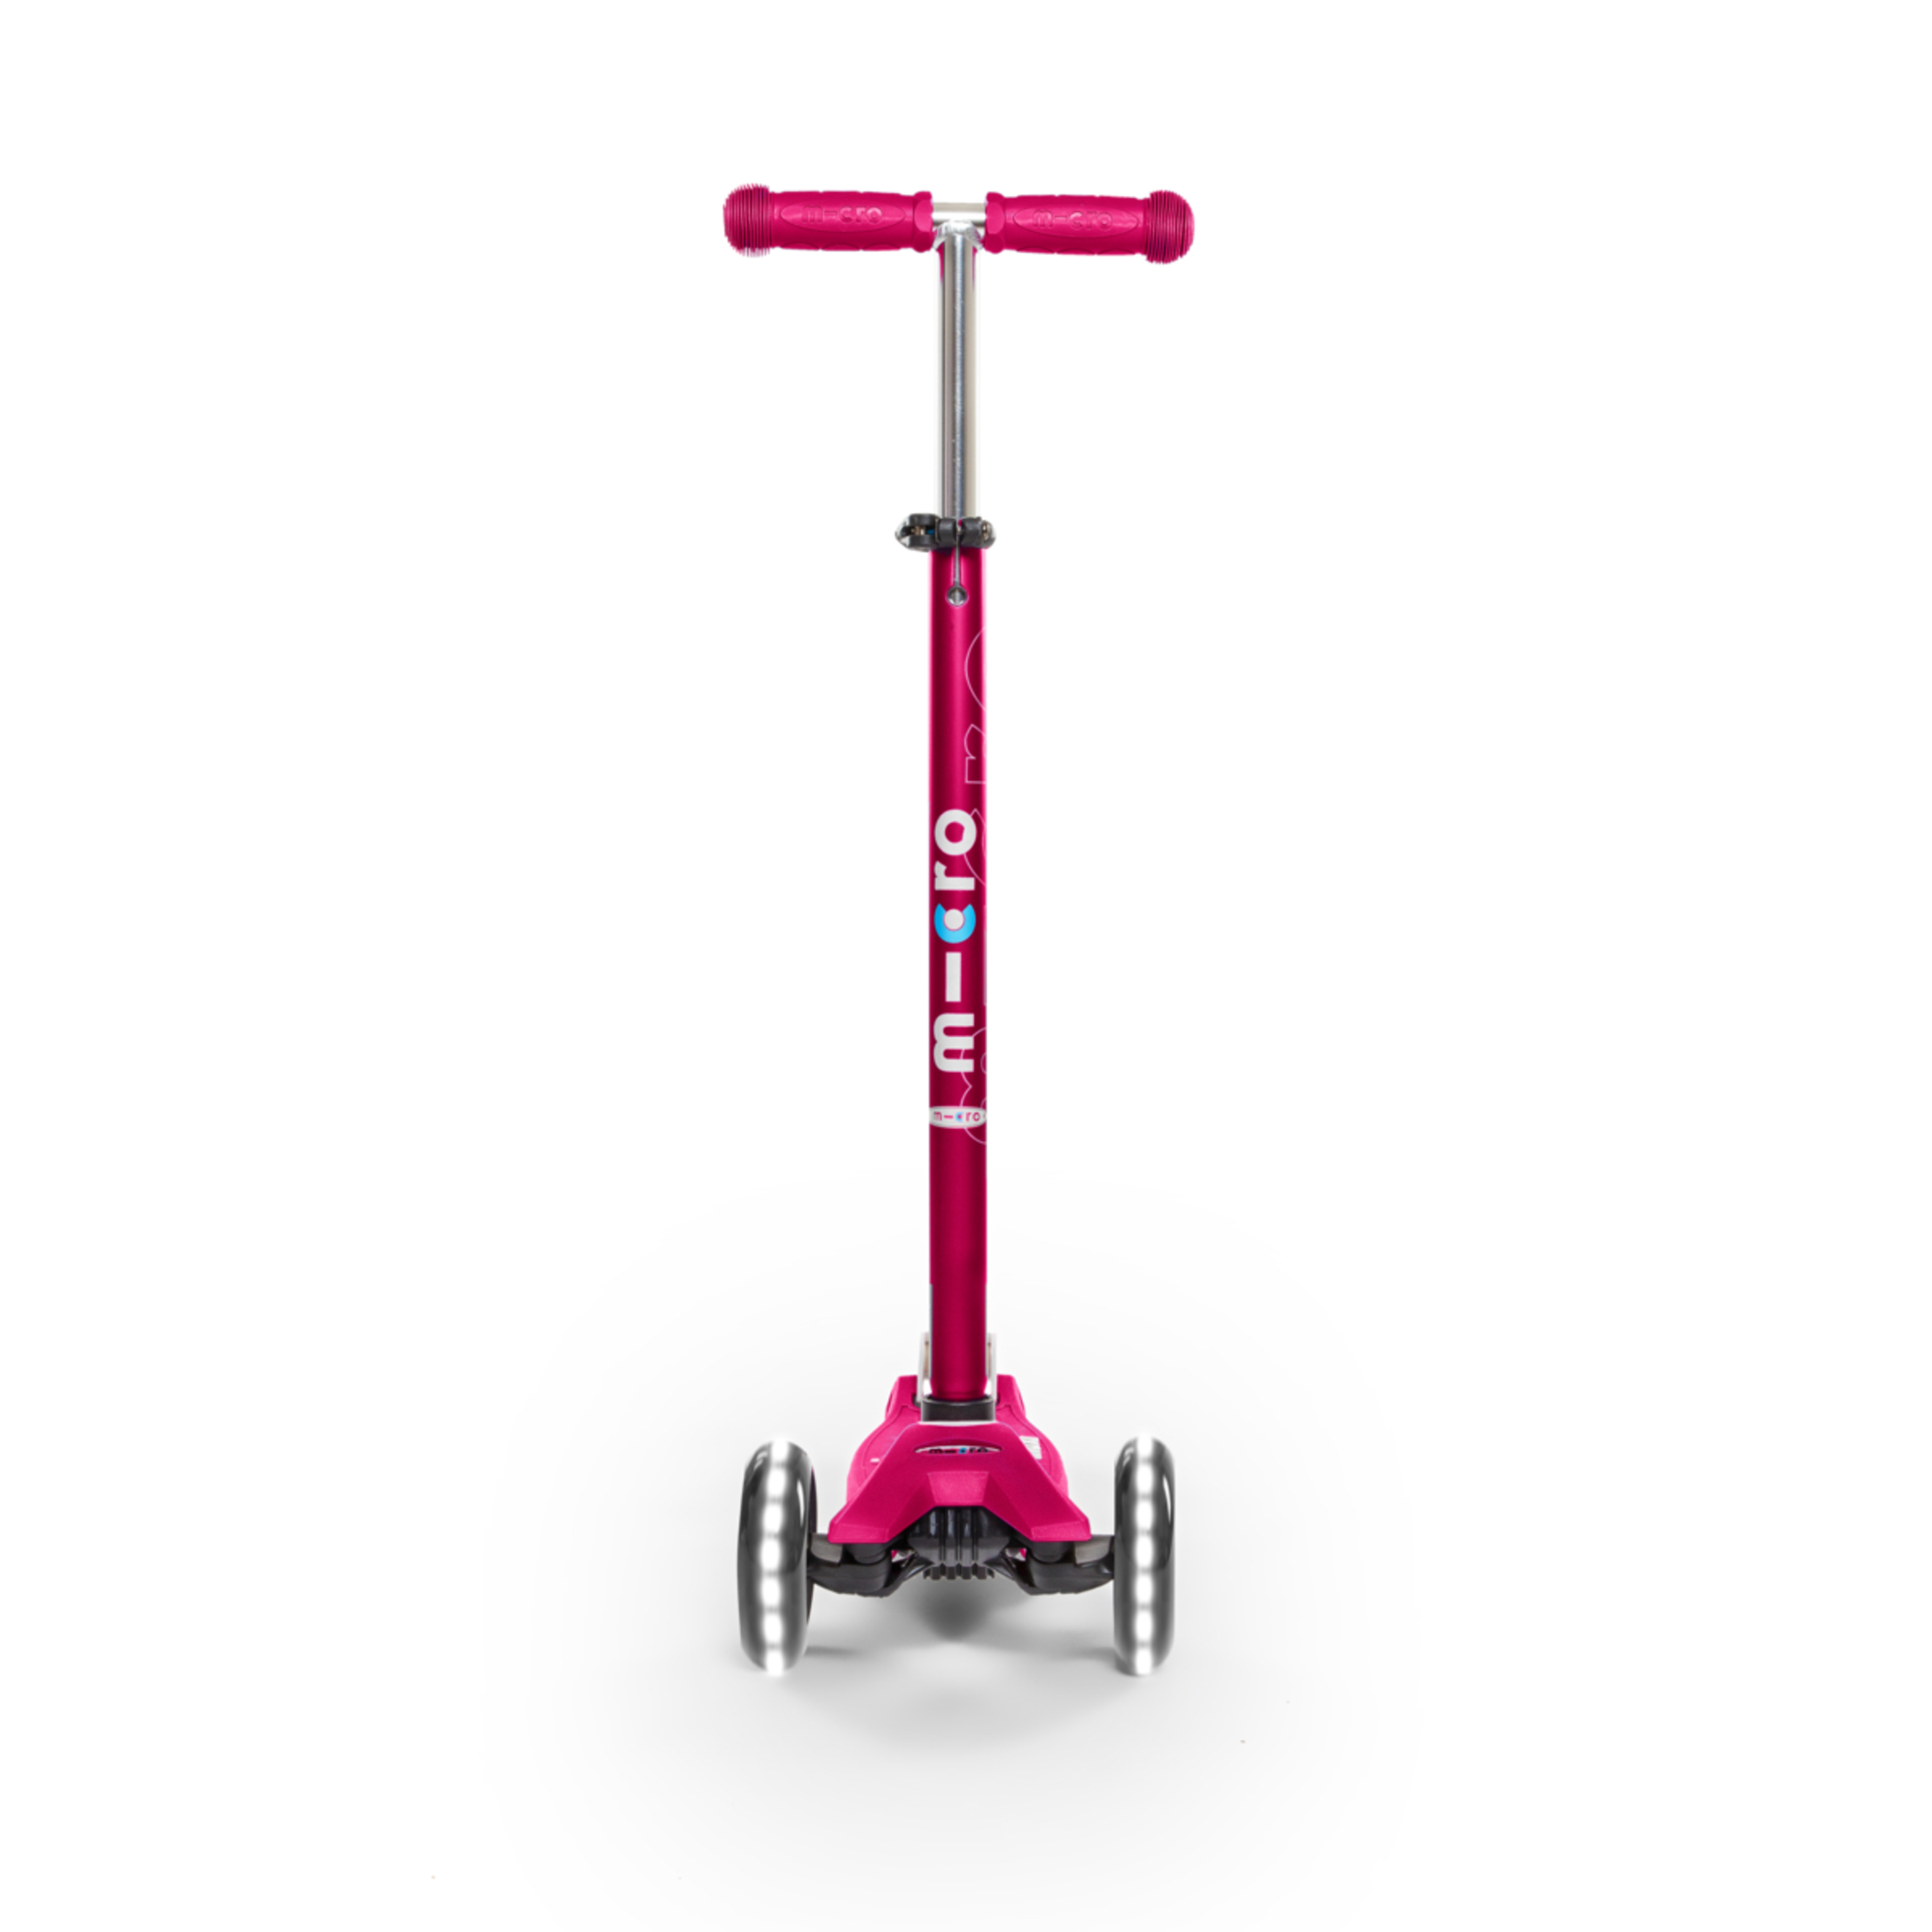 Patinete Maxi Micro Deluxe Rosa Led